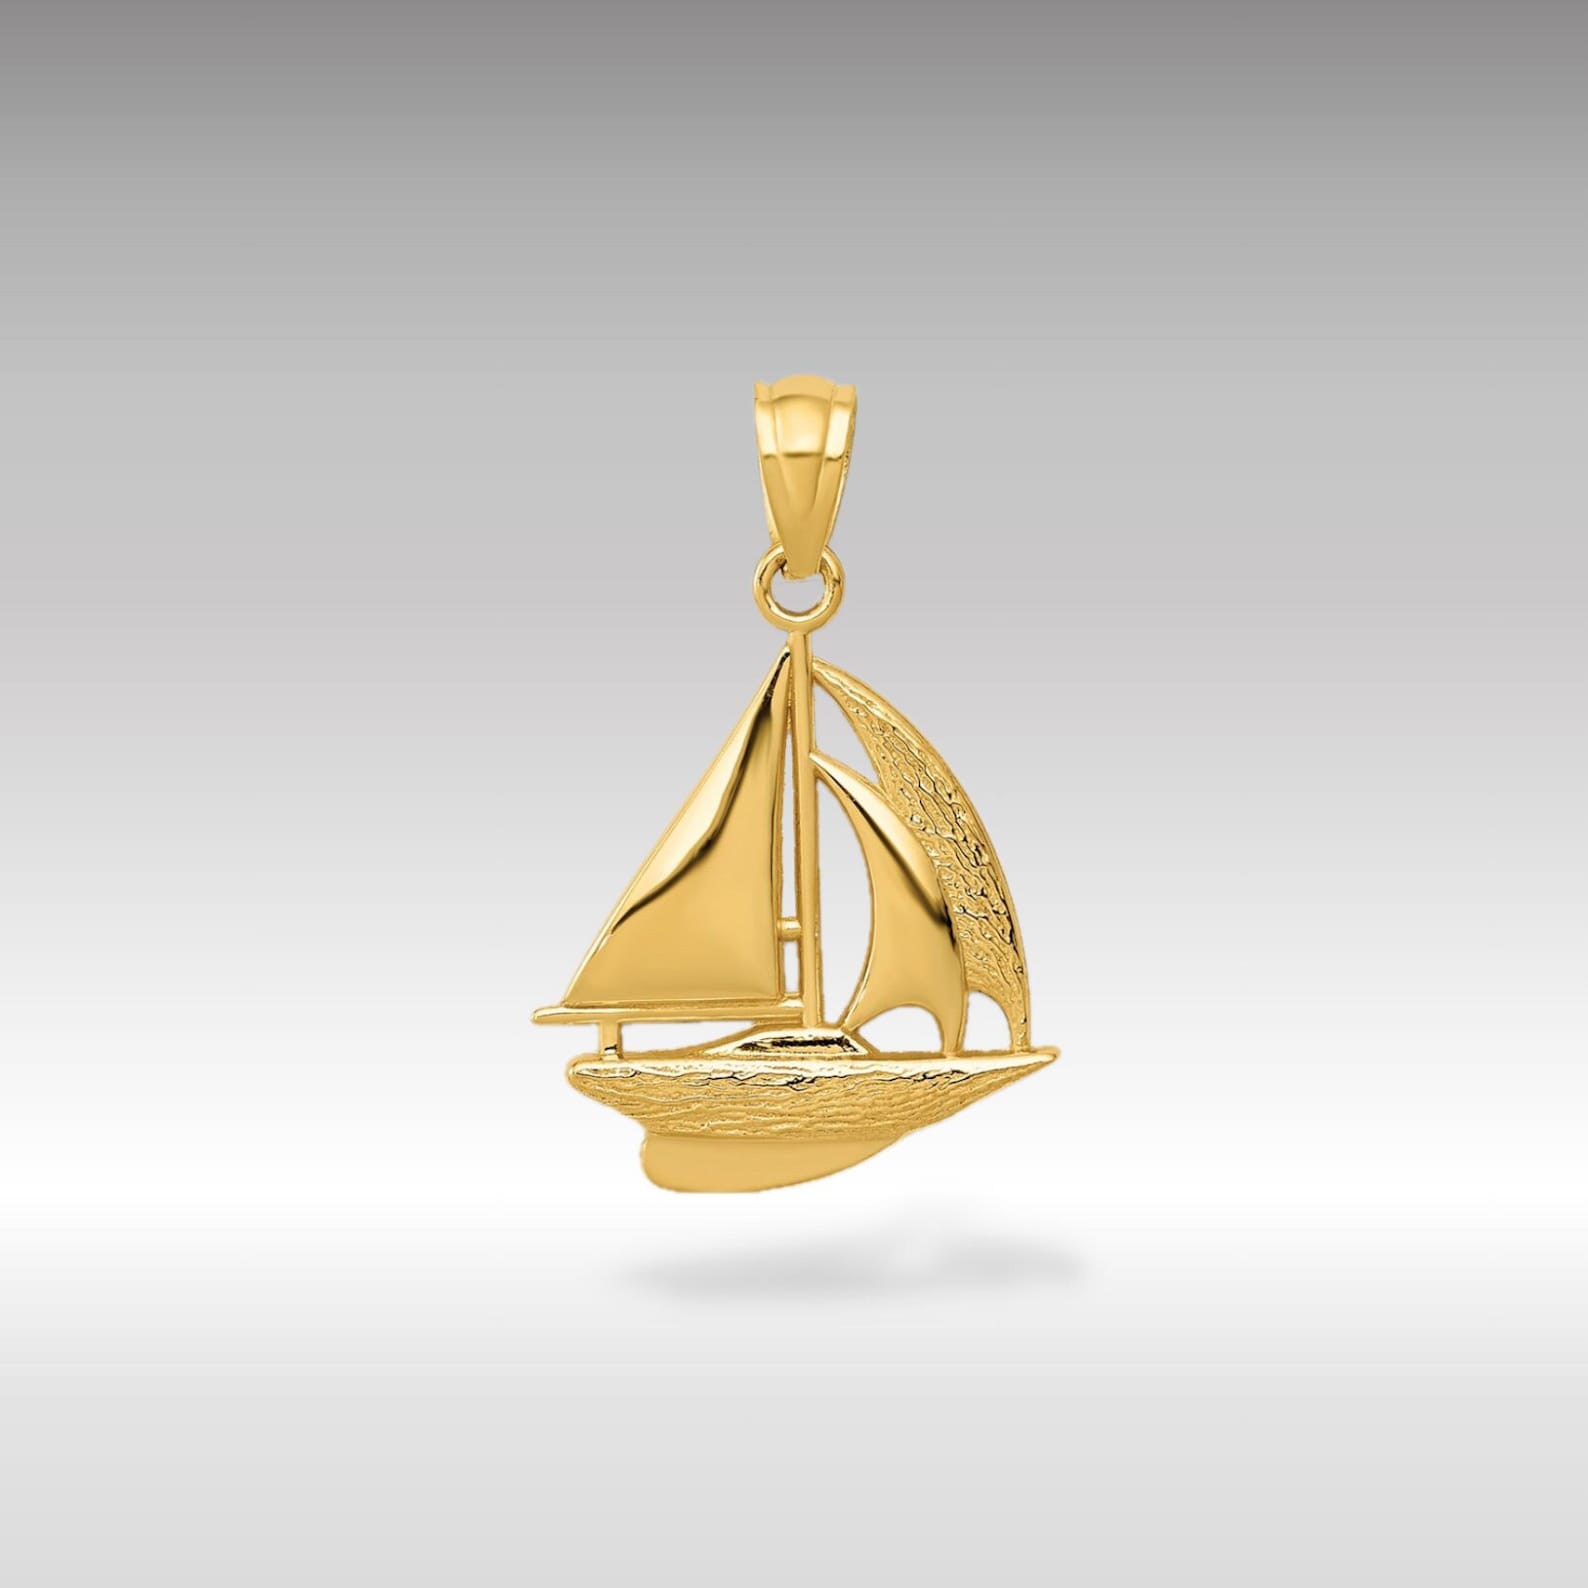 Gold Sailboat Pendant - Charlie & Co. Jewelry